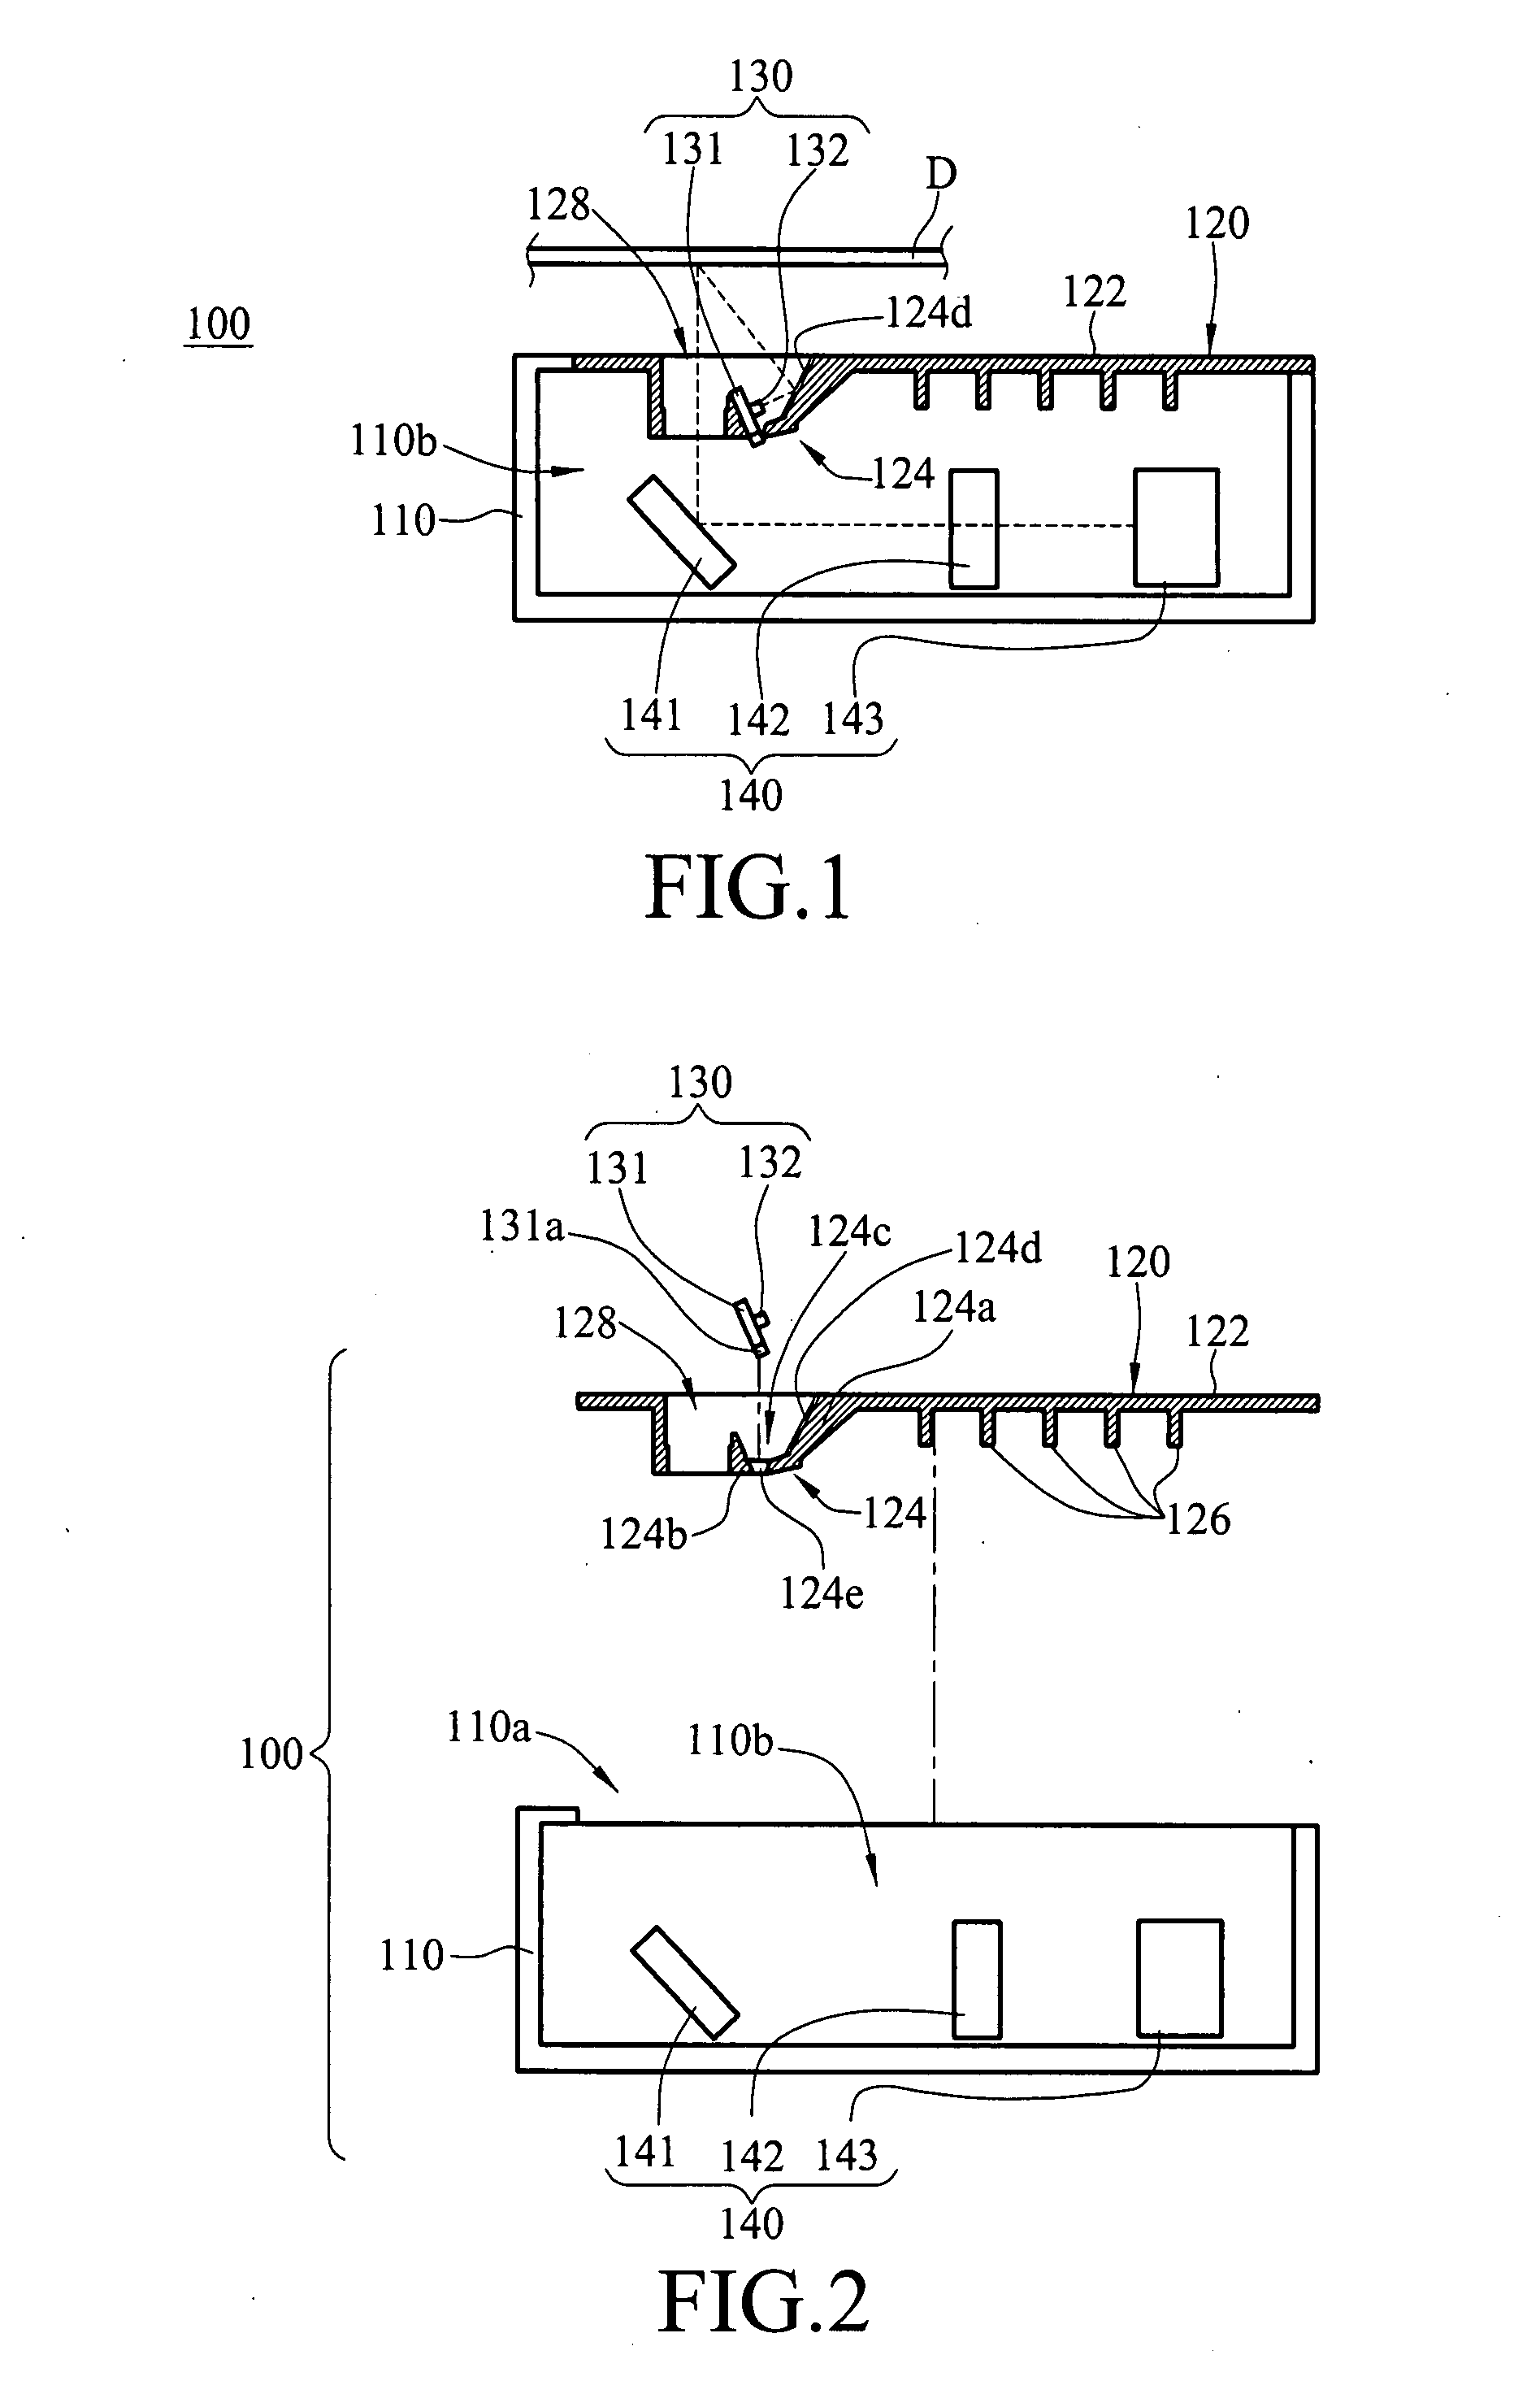 Scanning apparatus with heat dissipating ability